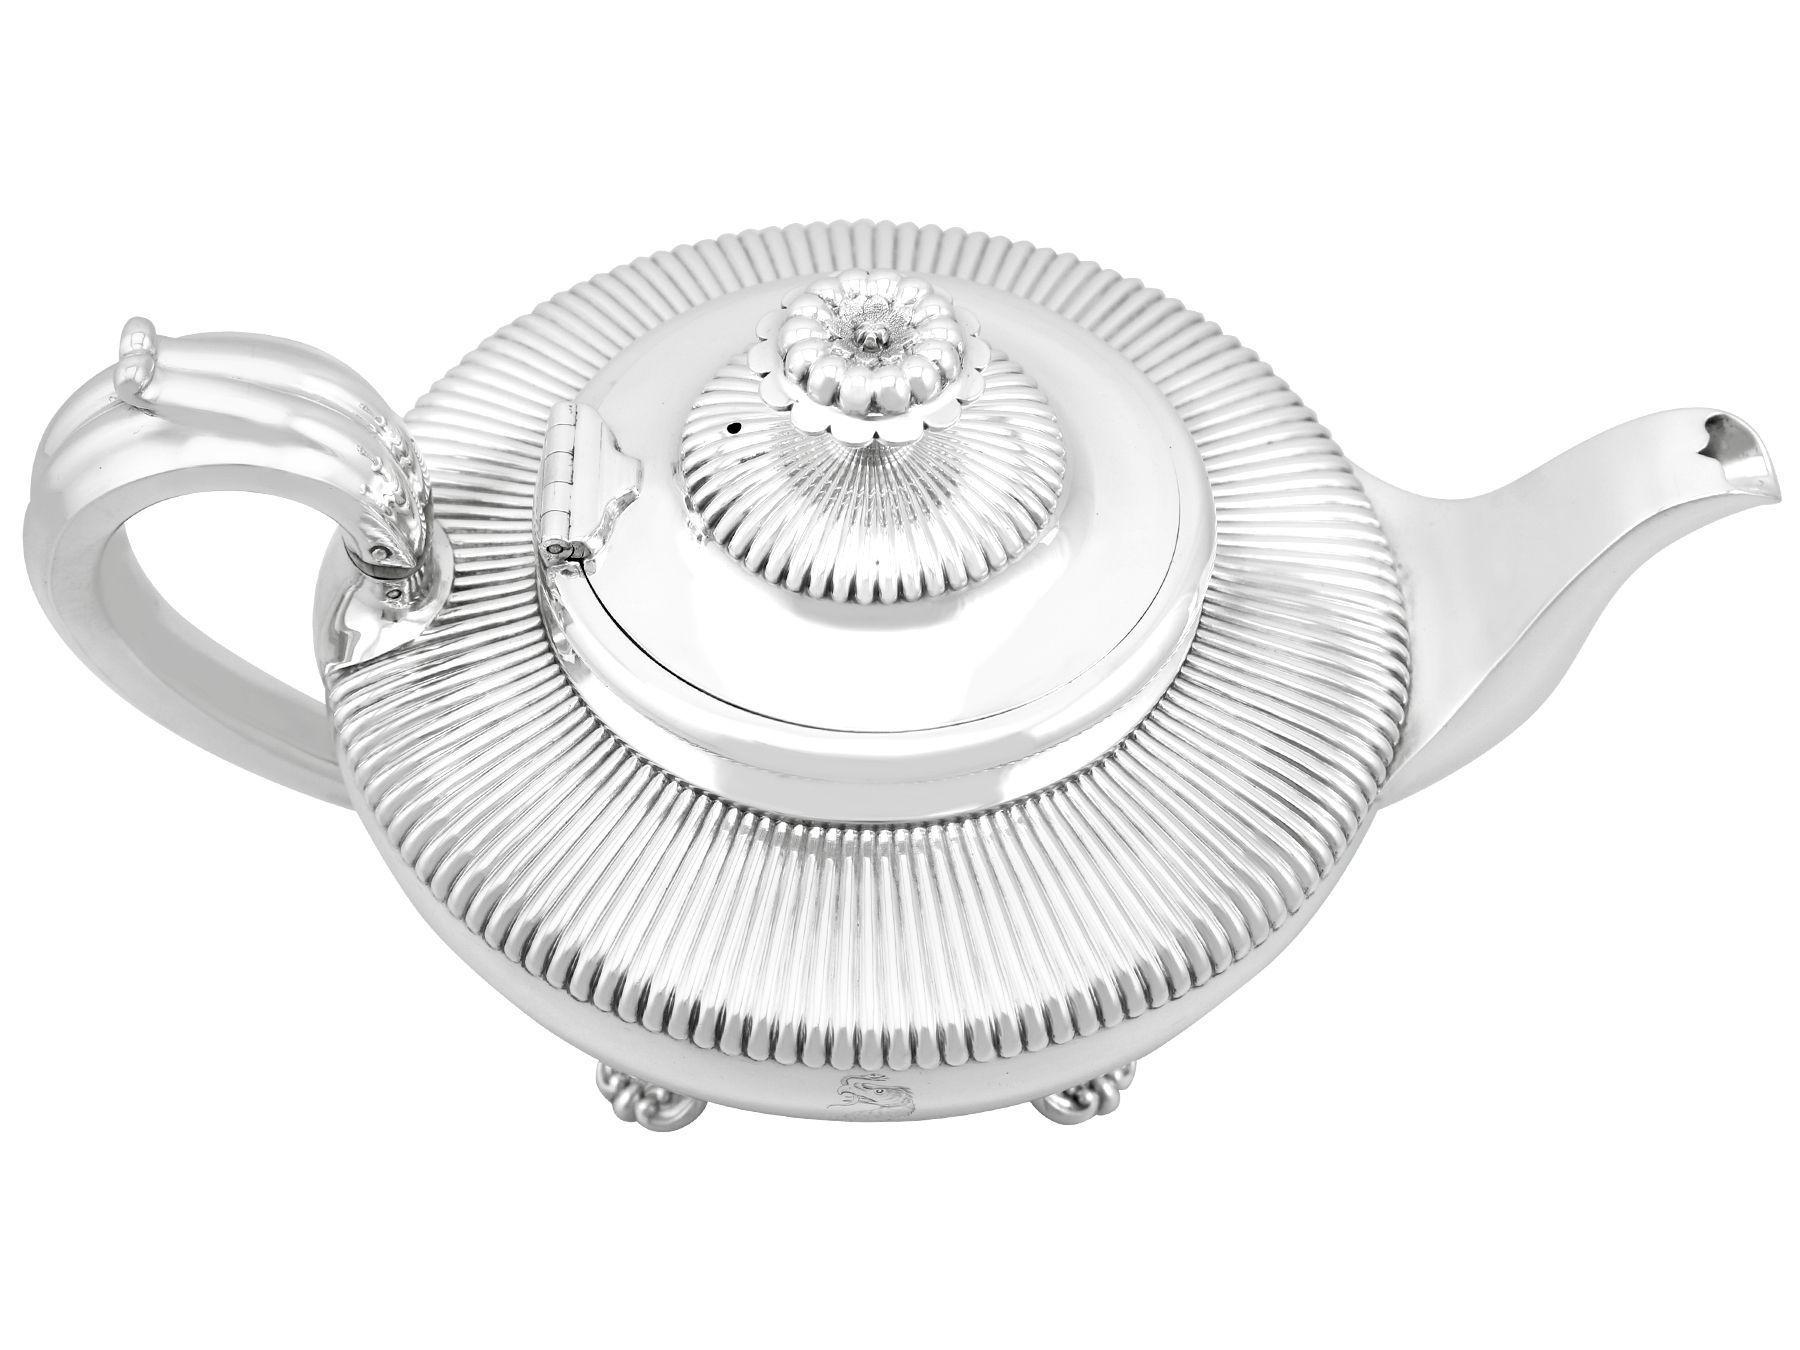 An exceptional, fine and impressive antique William IV English sterling silver teapot; an addition to our silver teaware collection.

This impressive antique silver teapot, in sterling standard, has a circular rounded form.

The upper portion of the